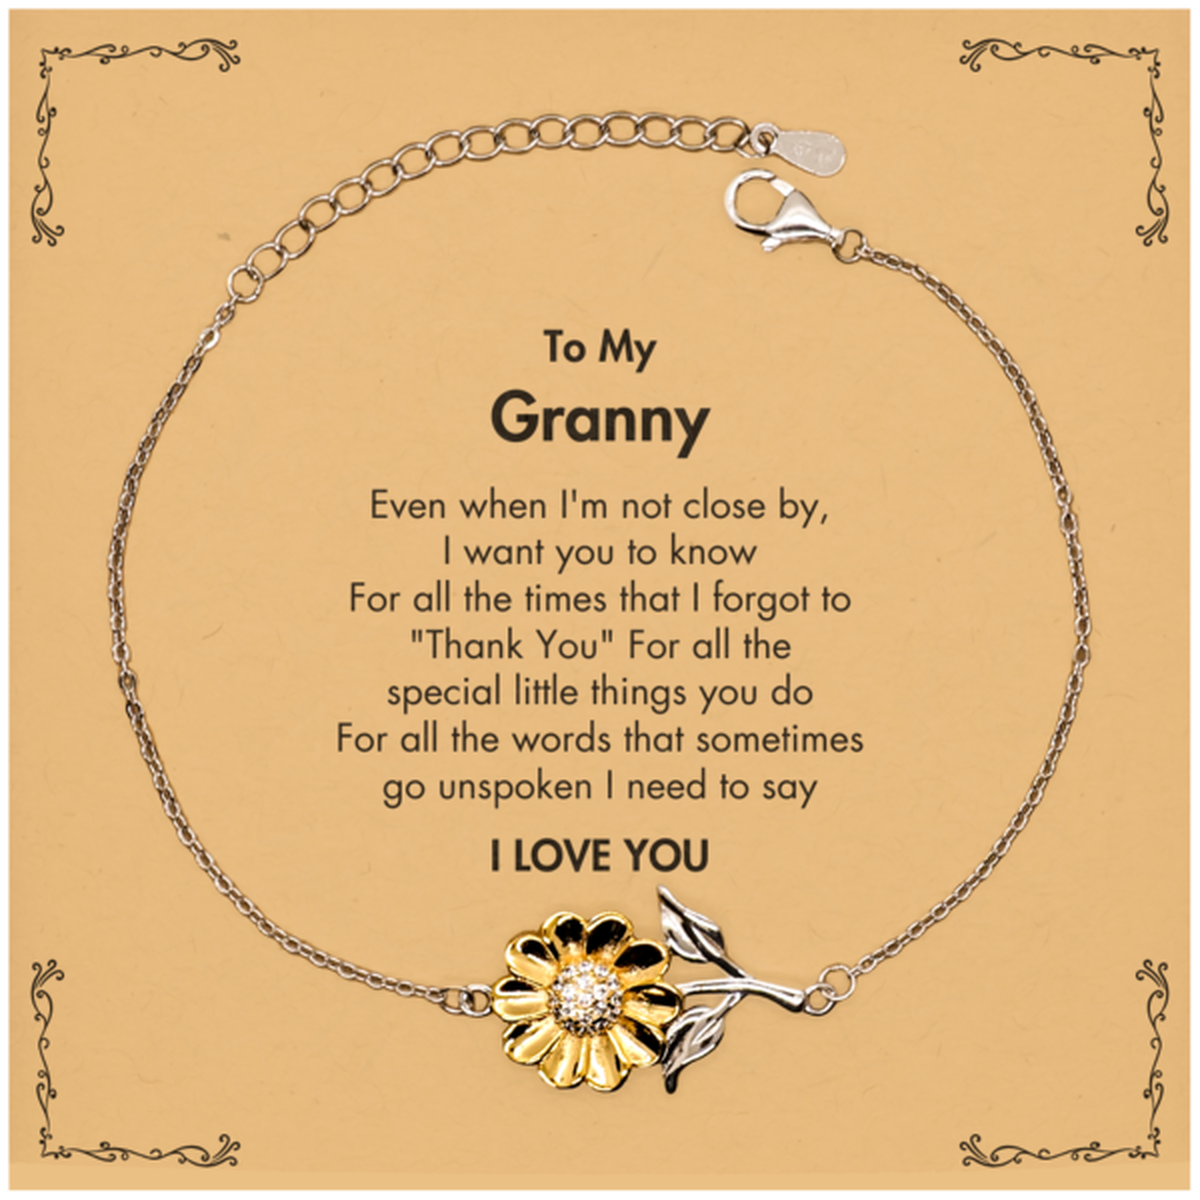 Thank You Gifts for Granny, Keepsake Sunflower Bracelet Gifts for Granny Birthday Mother's day Father's Day Granny For all the words That sometimes go unspoken I need to say I LOVE YOU